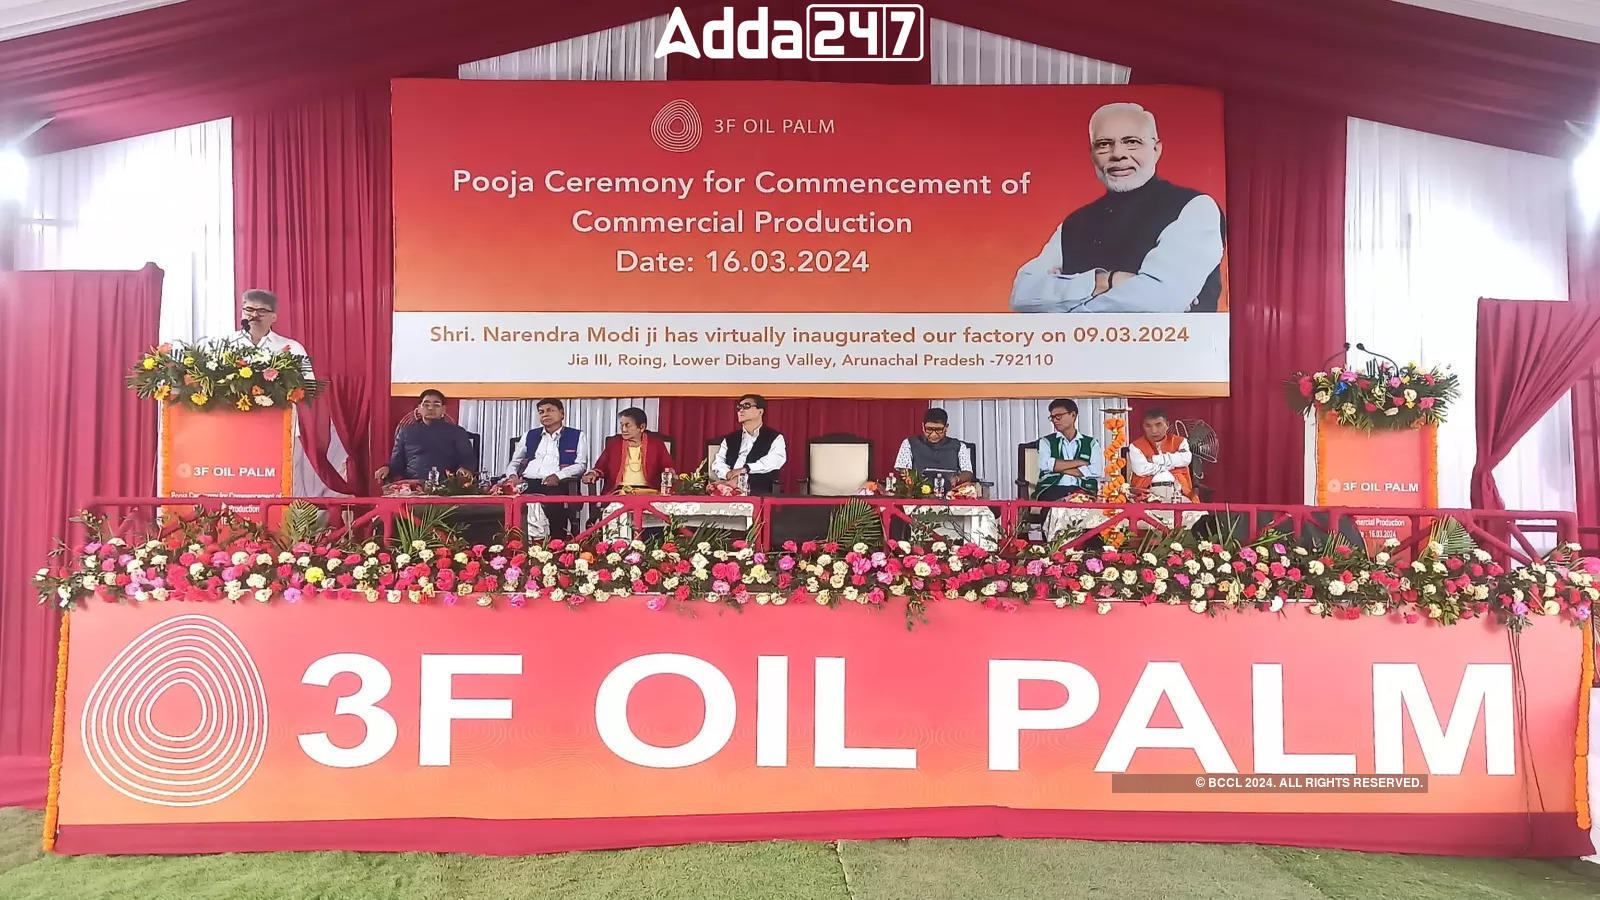 India’s First Integrated Oil Palm Processing Unit by 3F Oil Palm